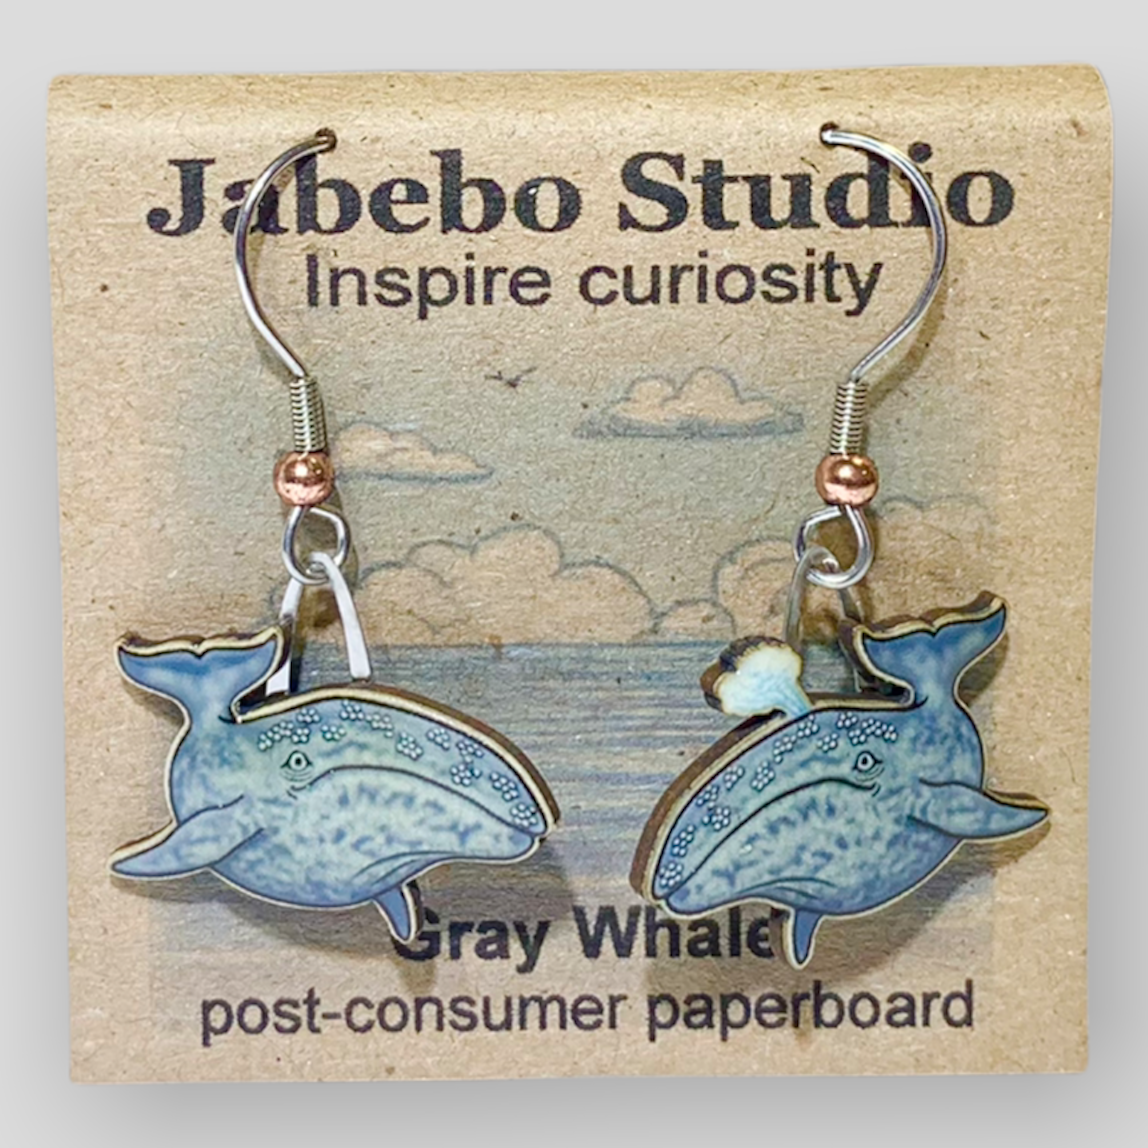 Picture shown is of 1 inch tall pair of earrings of the marine animal the Gray Whale.